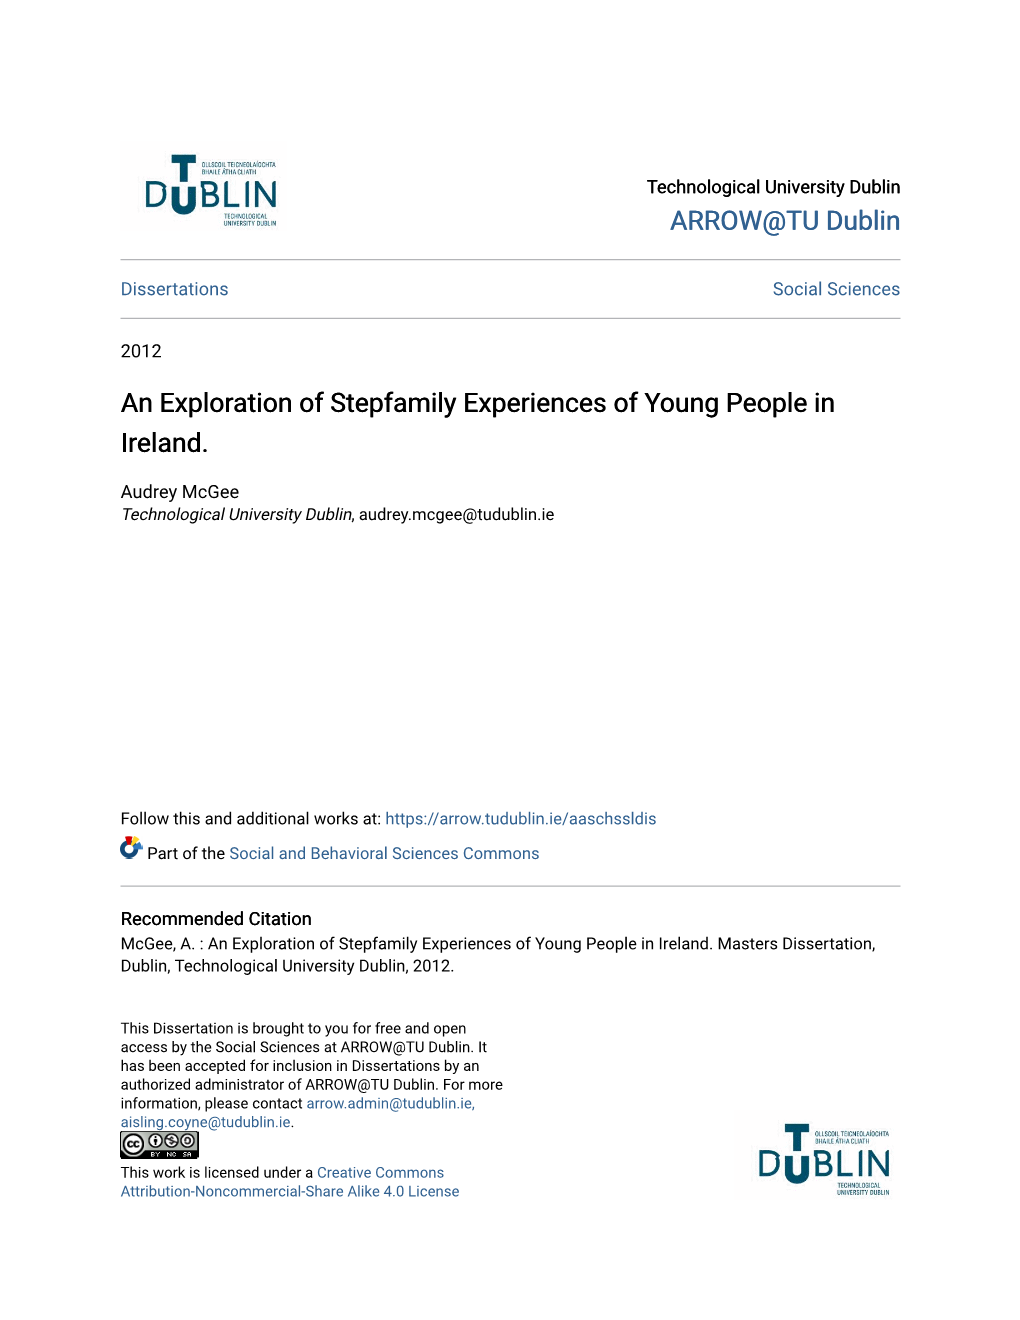 An Exploration of Stepfamily Experiences of Young People in Ireland